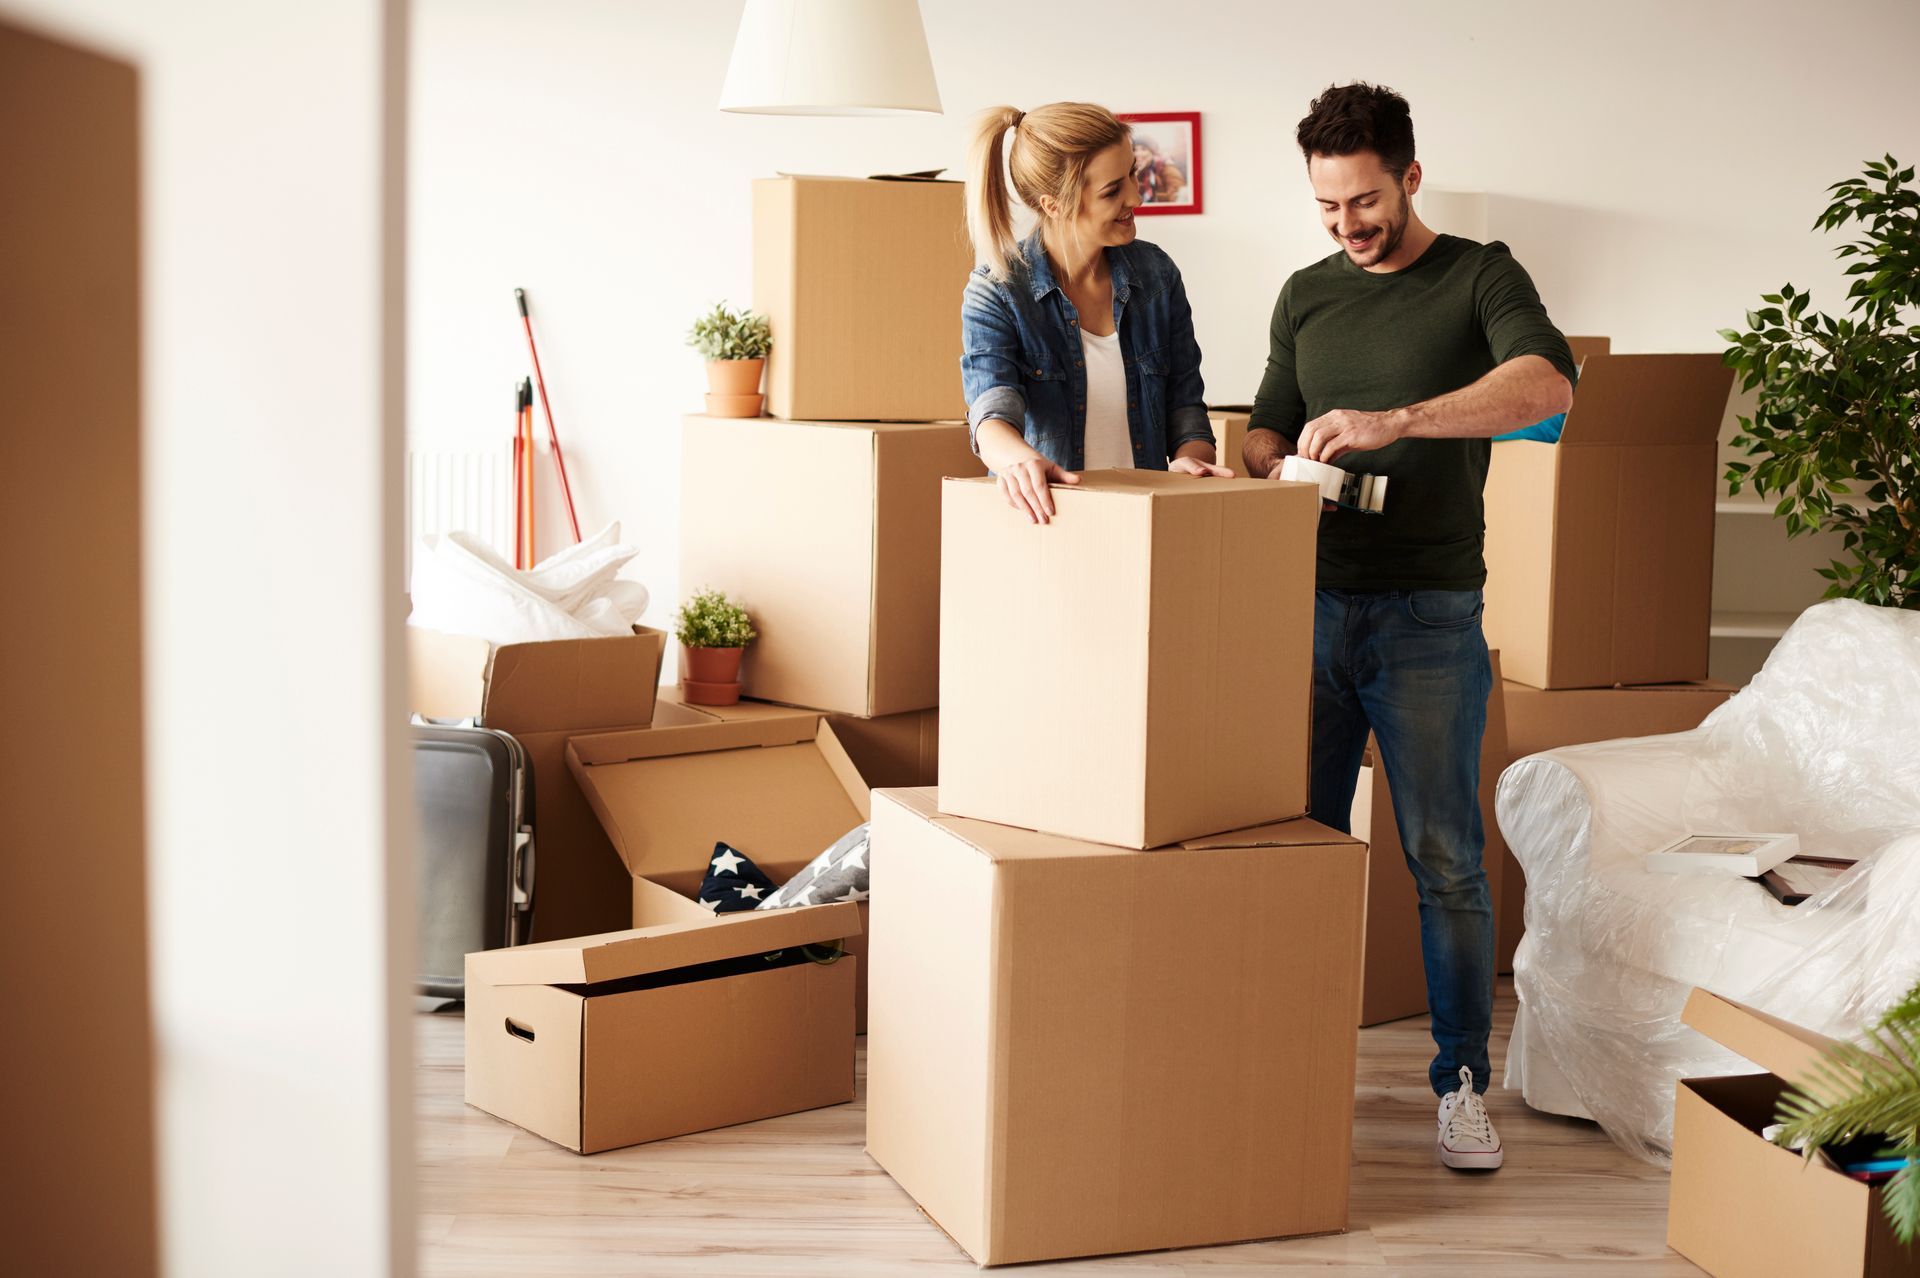 a man and a woman are packing boxes in a living room